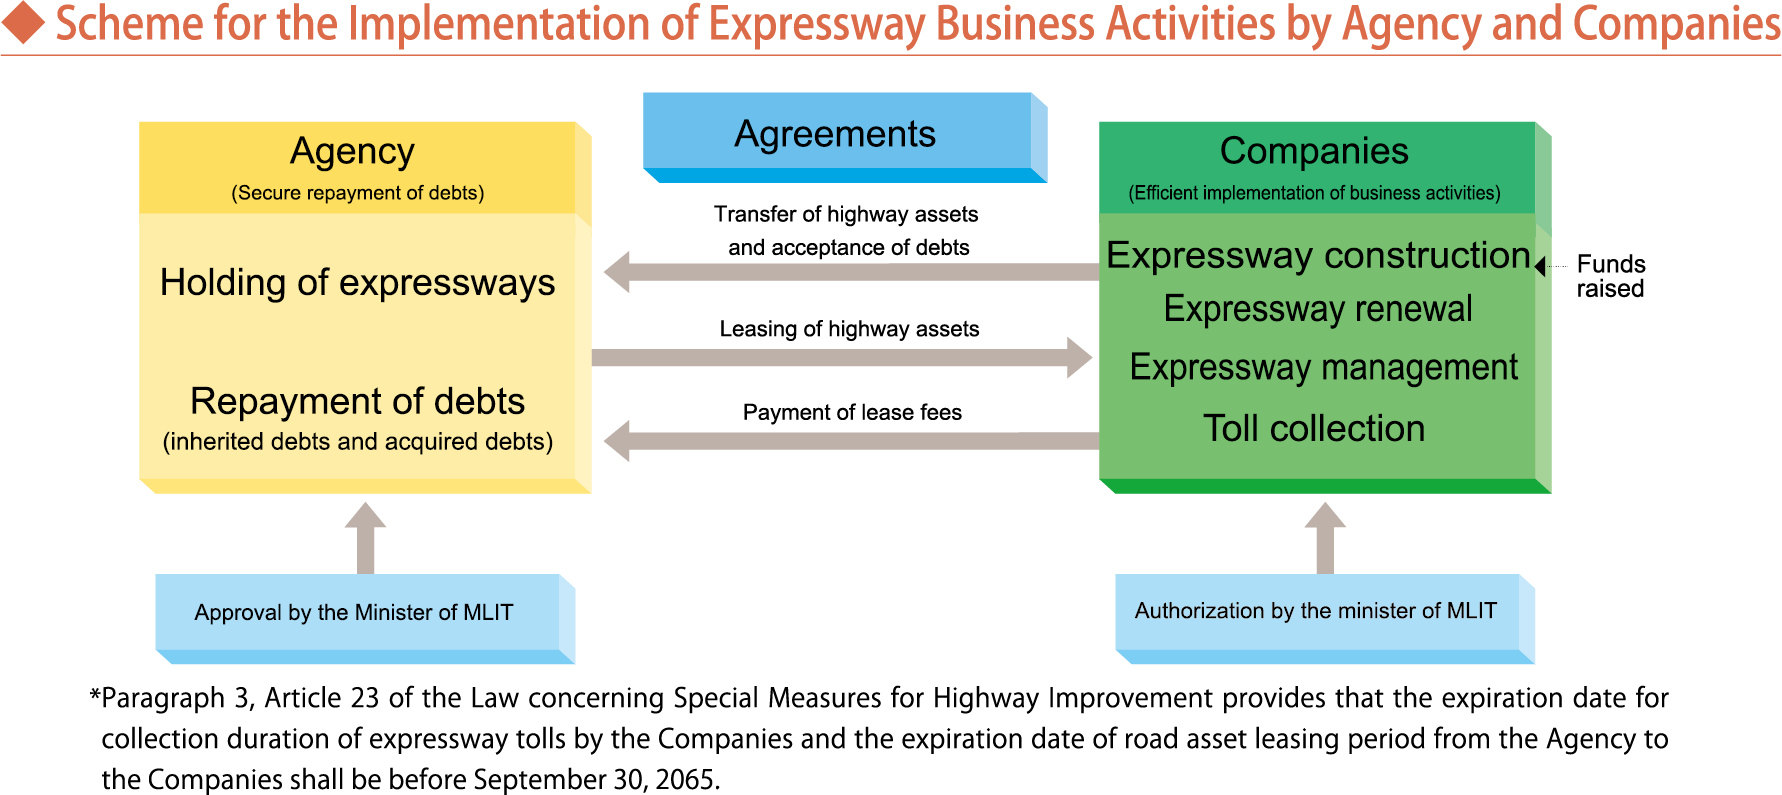 Scheme of implementation of expressway business by the Agency and the Companies. The Agency maintains expressway assets, leases them to the Companies, and receives payment of leasing fees from the Companies to repay the debts, including those due to the leased from the Agency, collect fees from the users to appropriate the fees to the payment of leases, while promoting construction and renovation of expressways and delivering them to the Agency together with the debts.